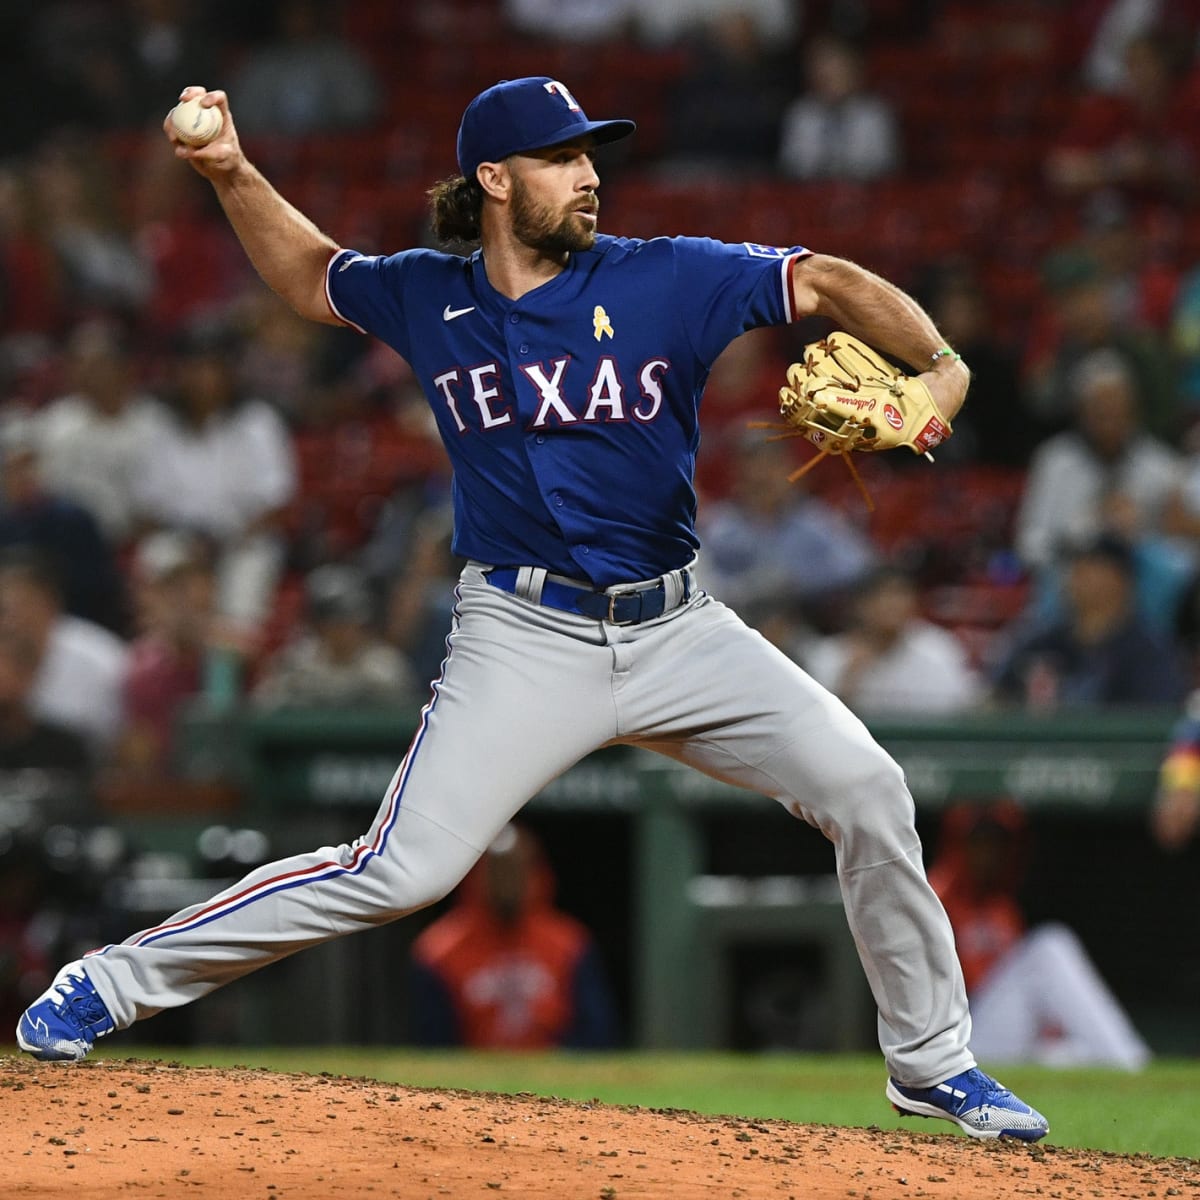 Charlie's back: Utility infielder Culberson makes Rangers' opening